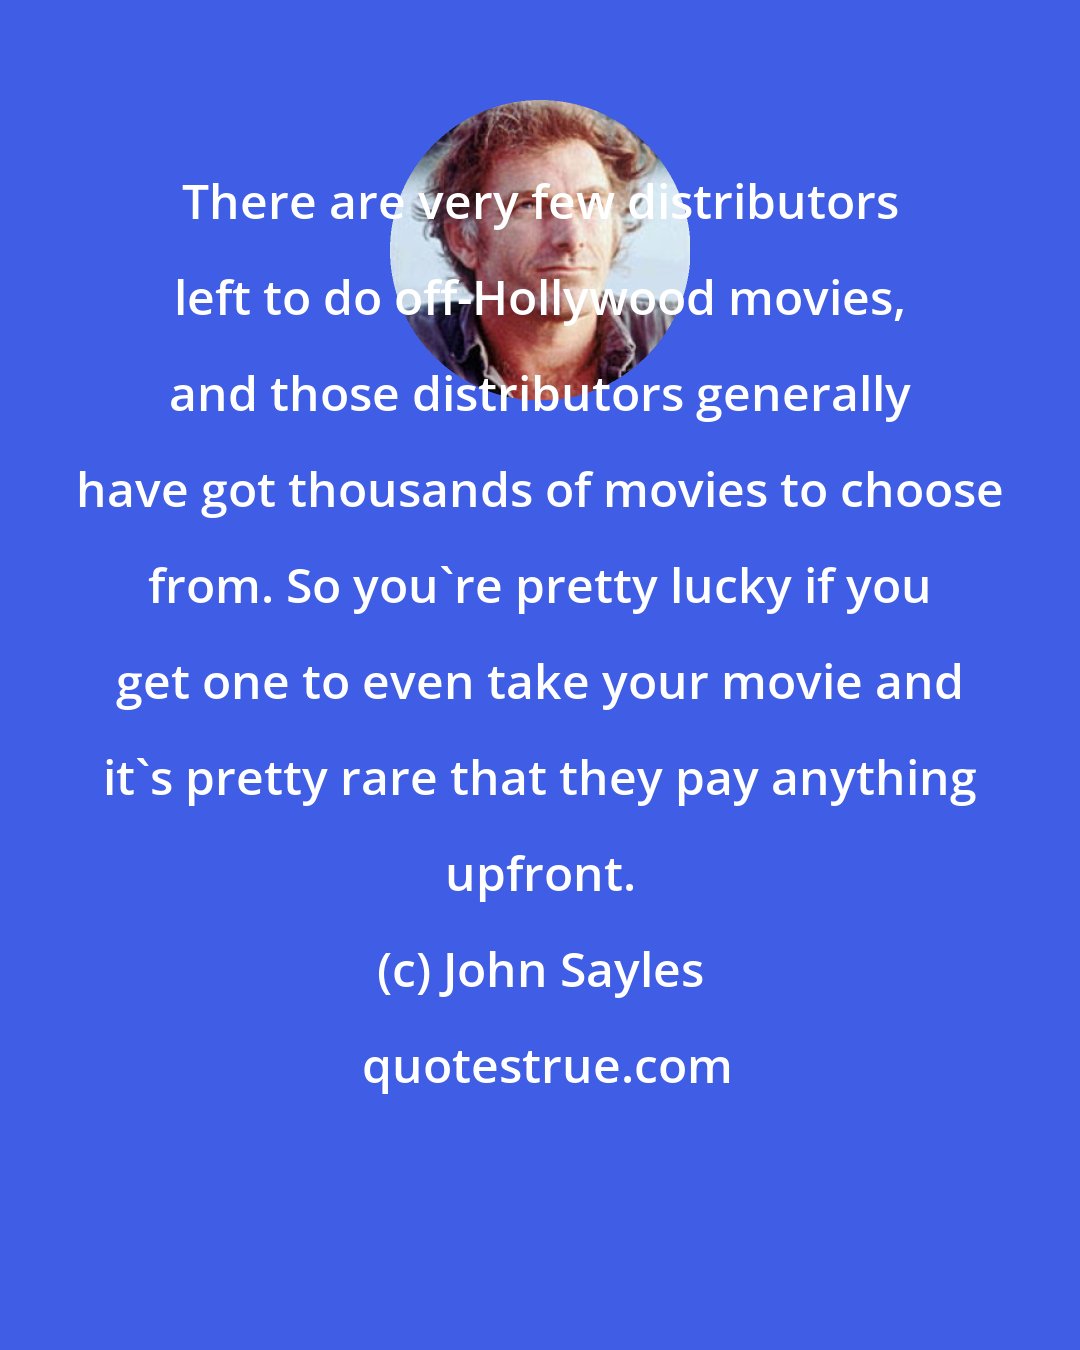 John Sayles: There are very few distributors left to do off-Hollywood movies, and those distributors generally have got thousands of movies to choose from. So you're pretty lucky if you get one to even take your movie and it's pretty rare that they pay anything upfront.